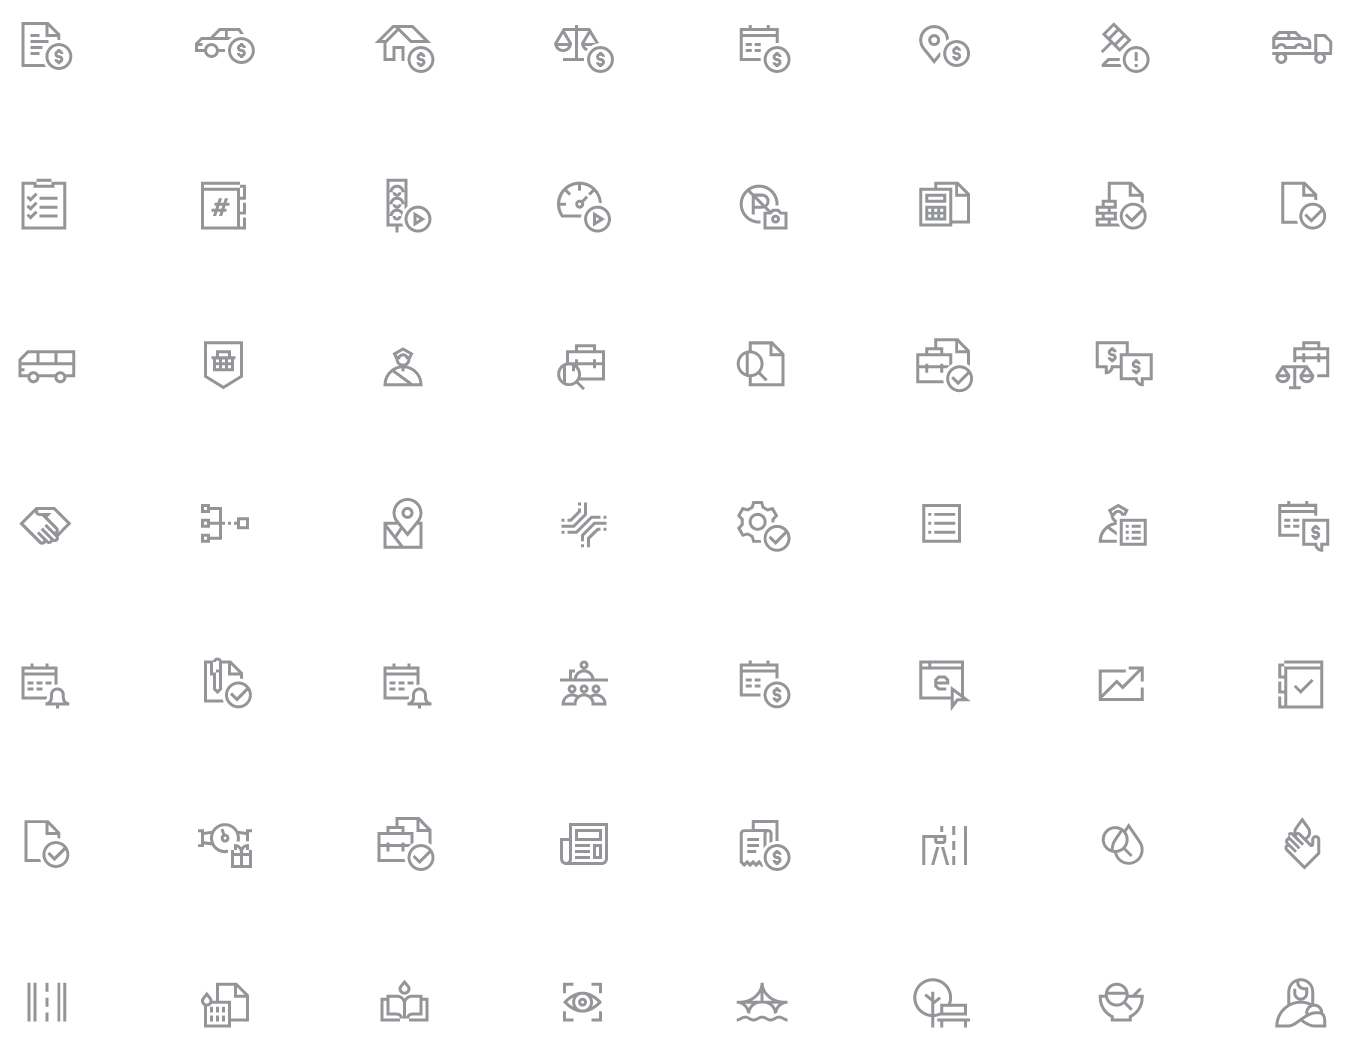 Examples of icons you can download for free